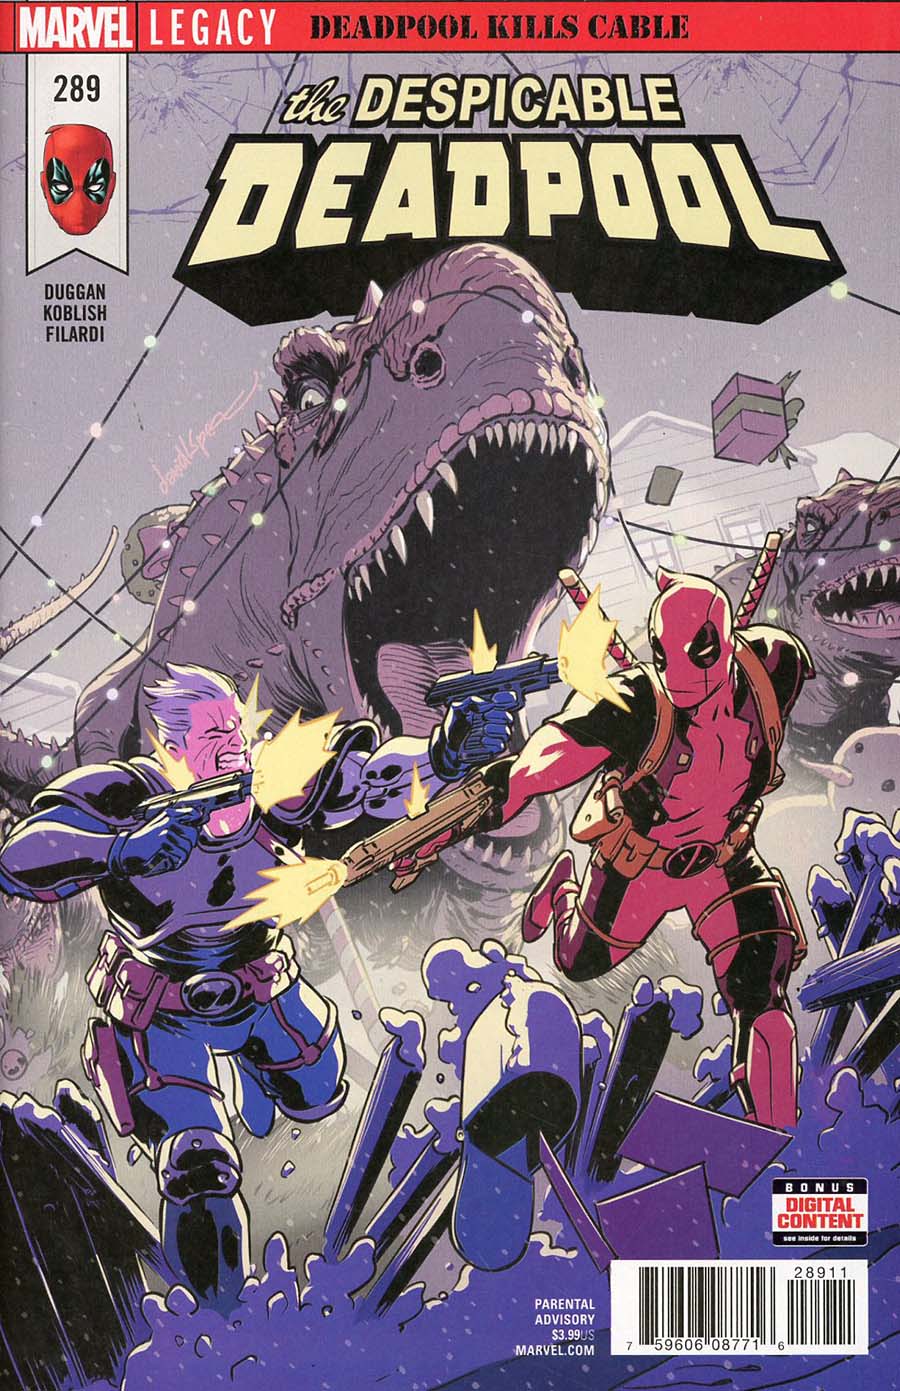 Despicable Deadpool #289 Cover A Regular David Lopez Cover (Marvel Legacy Tie-In)